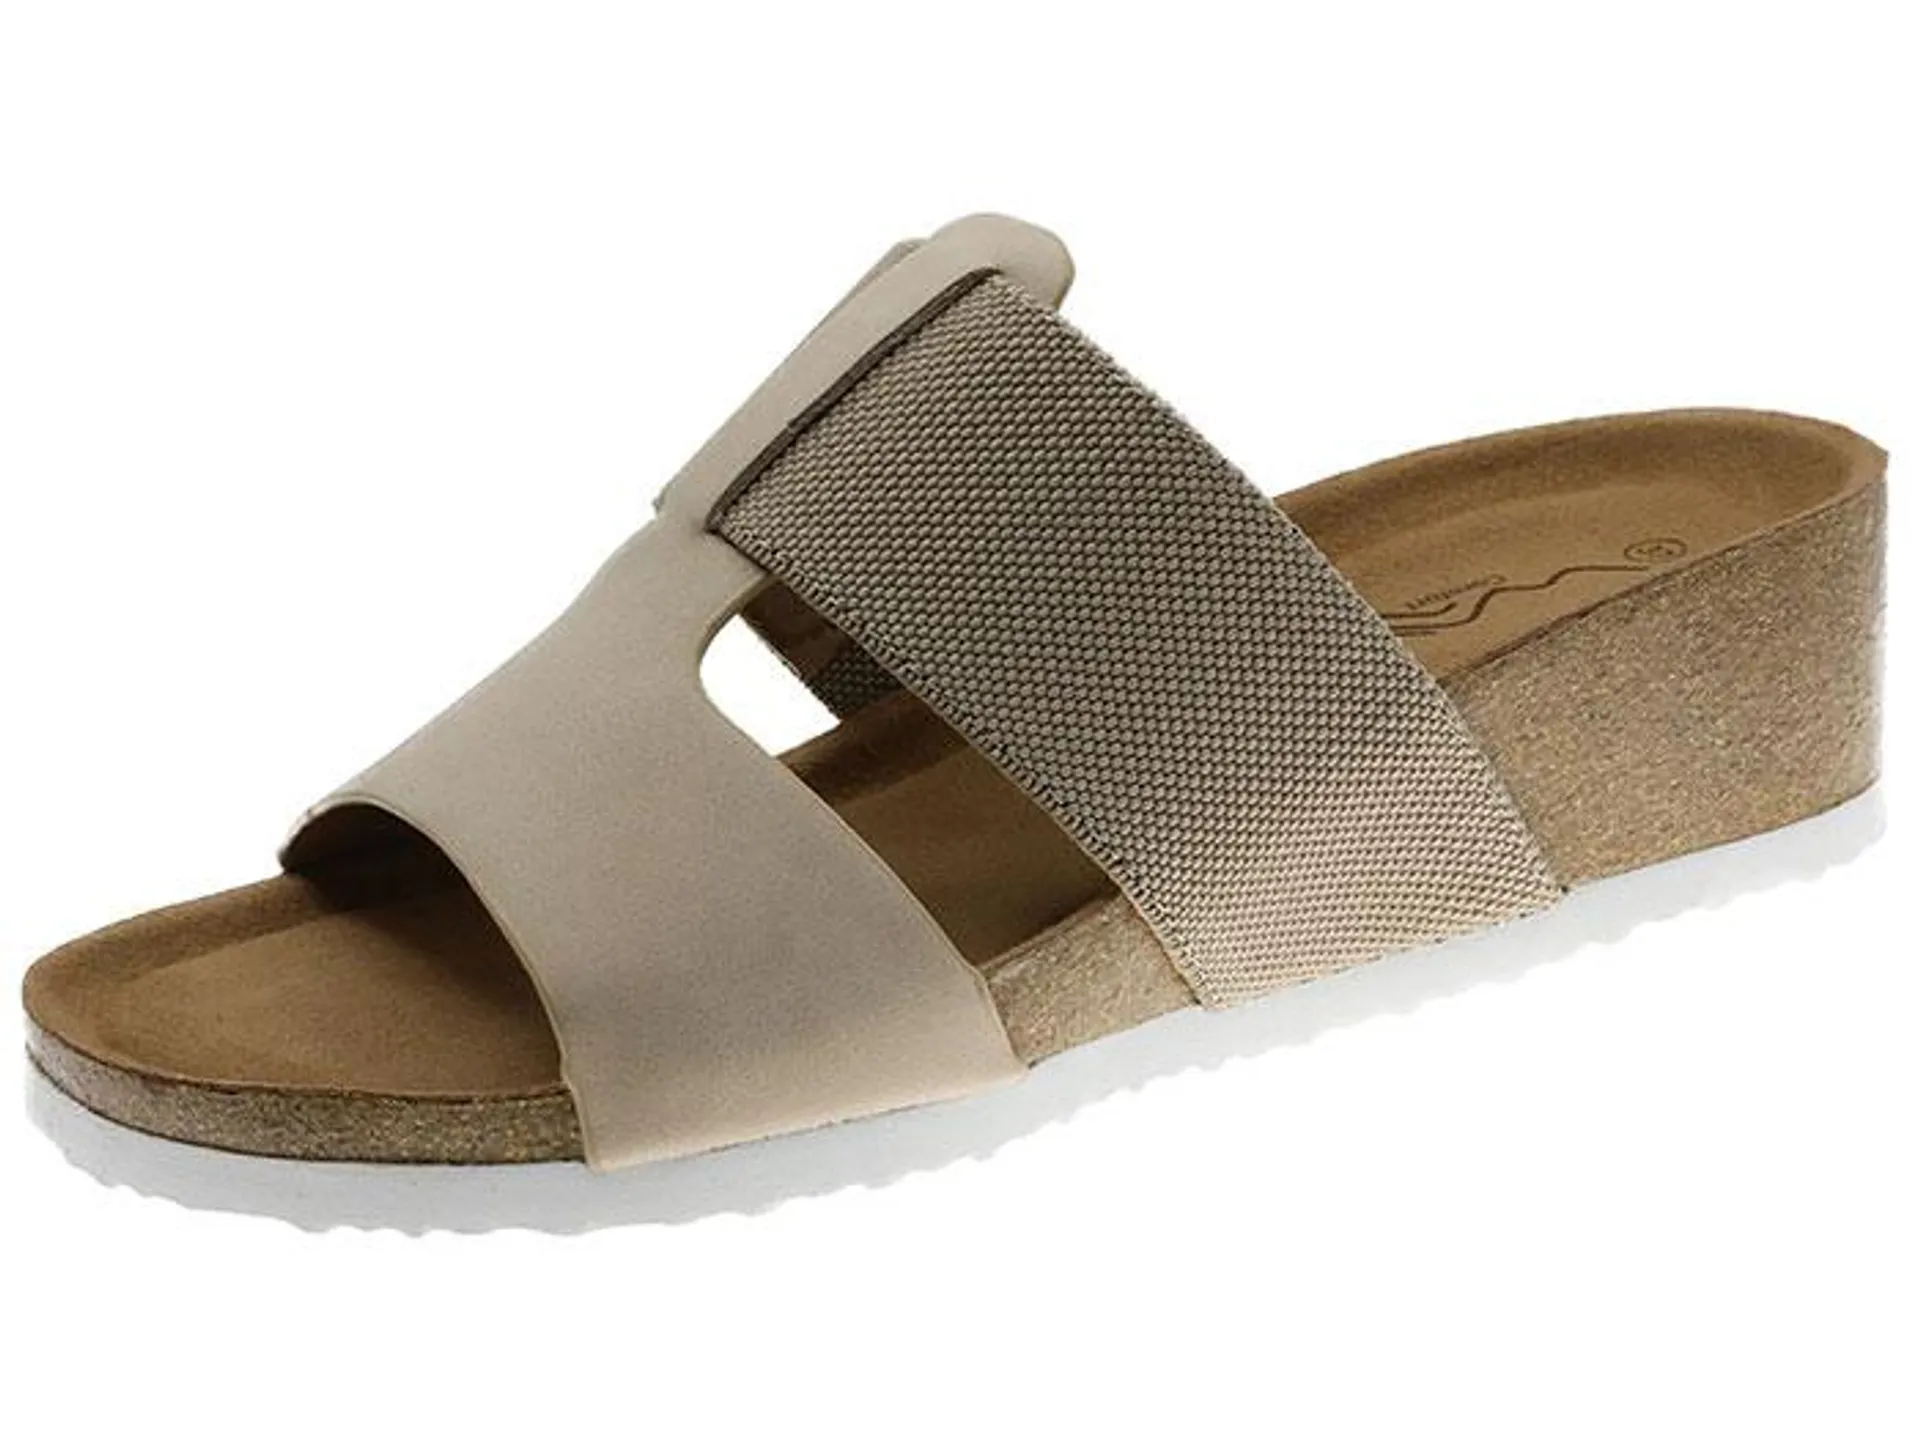 Casual slipper for woman